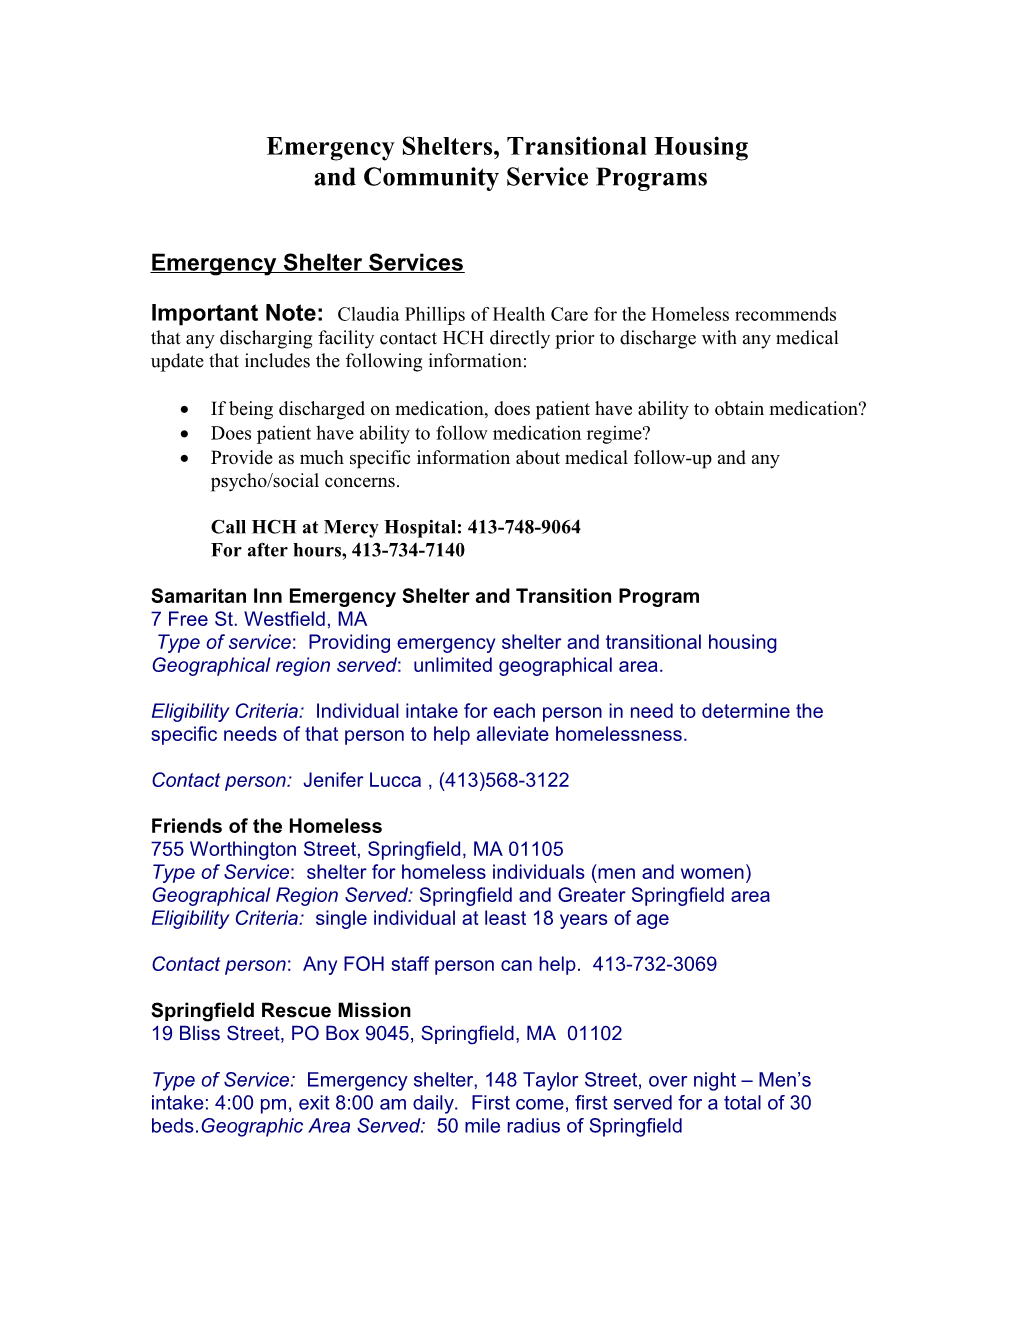 Emergency Shelters, Transitional Housing and Community Service Programs